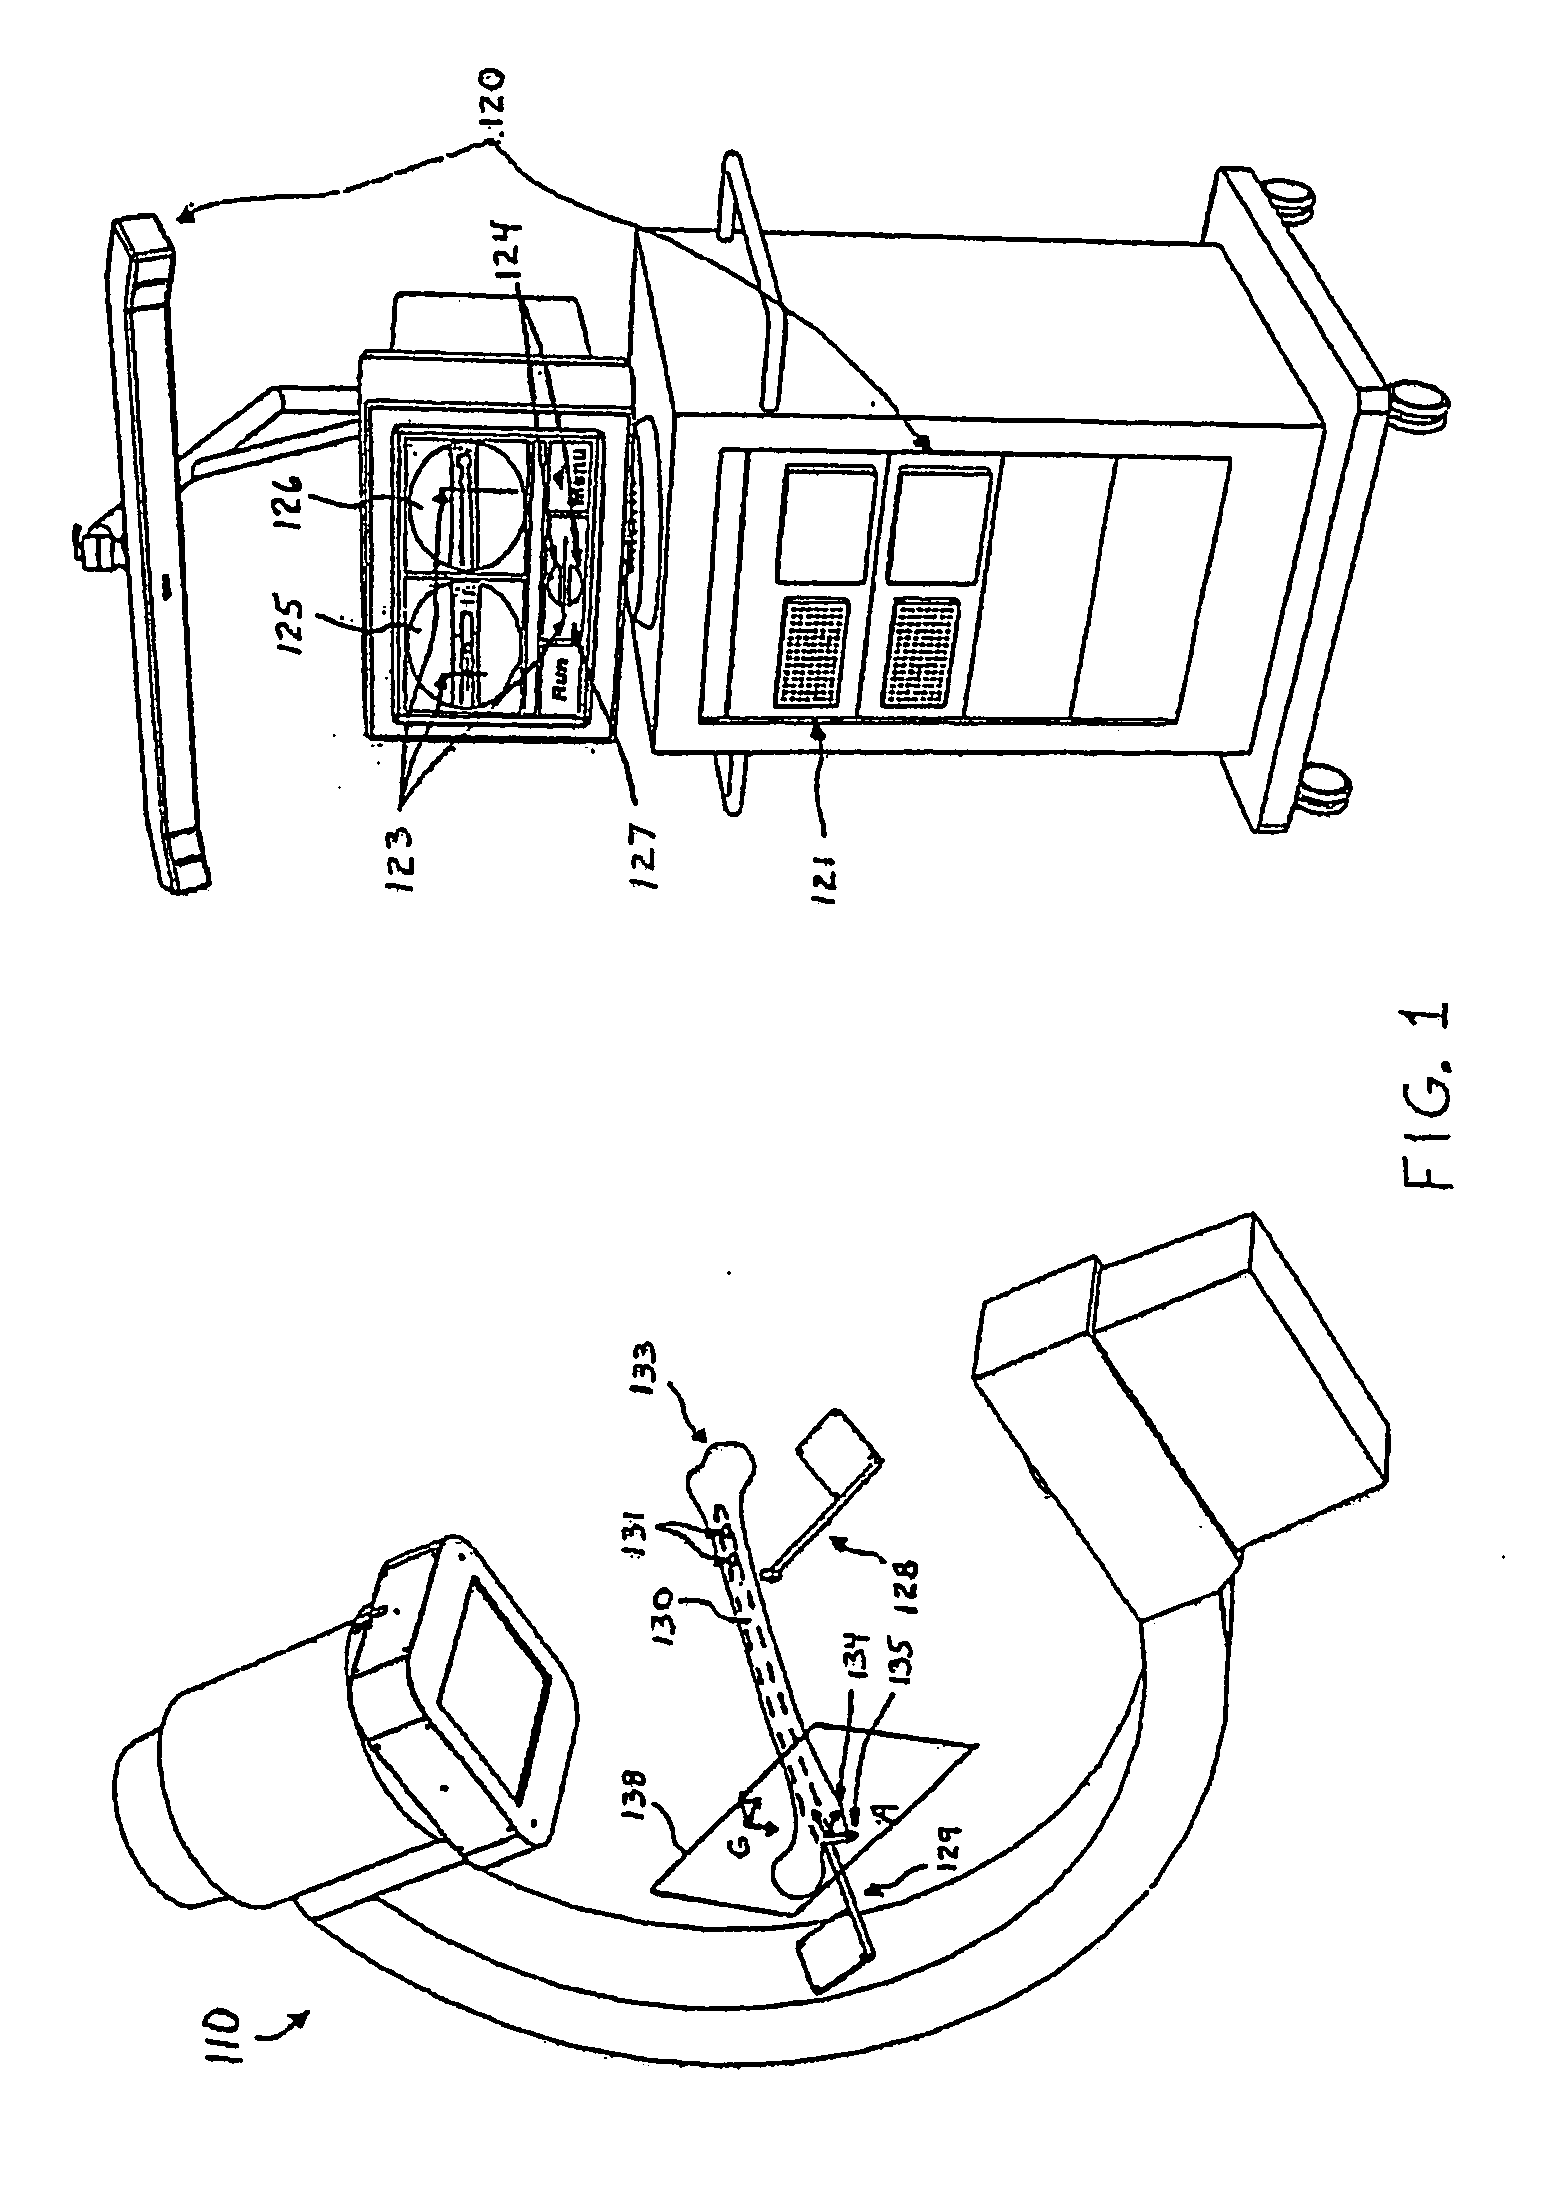 Apparatus and method for improving the accuracy of navigated surgical instrument